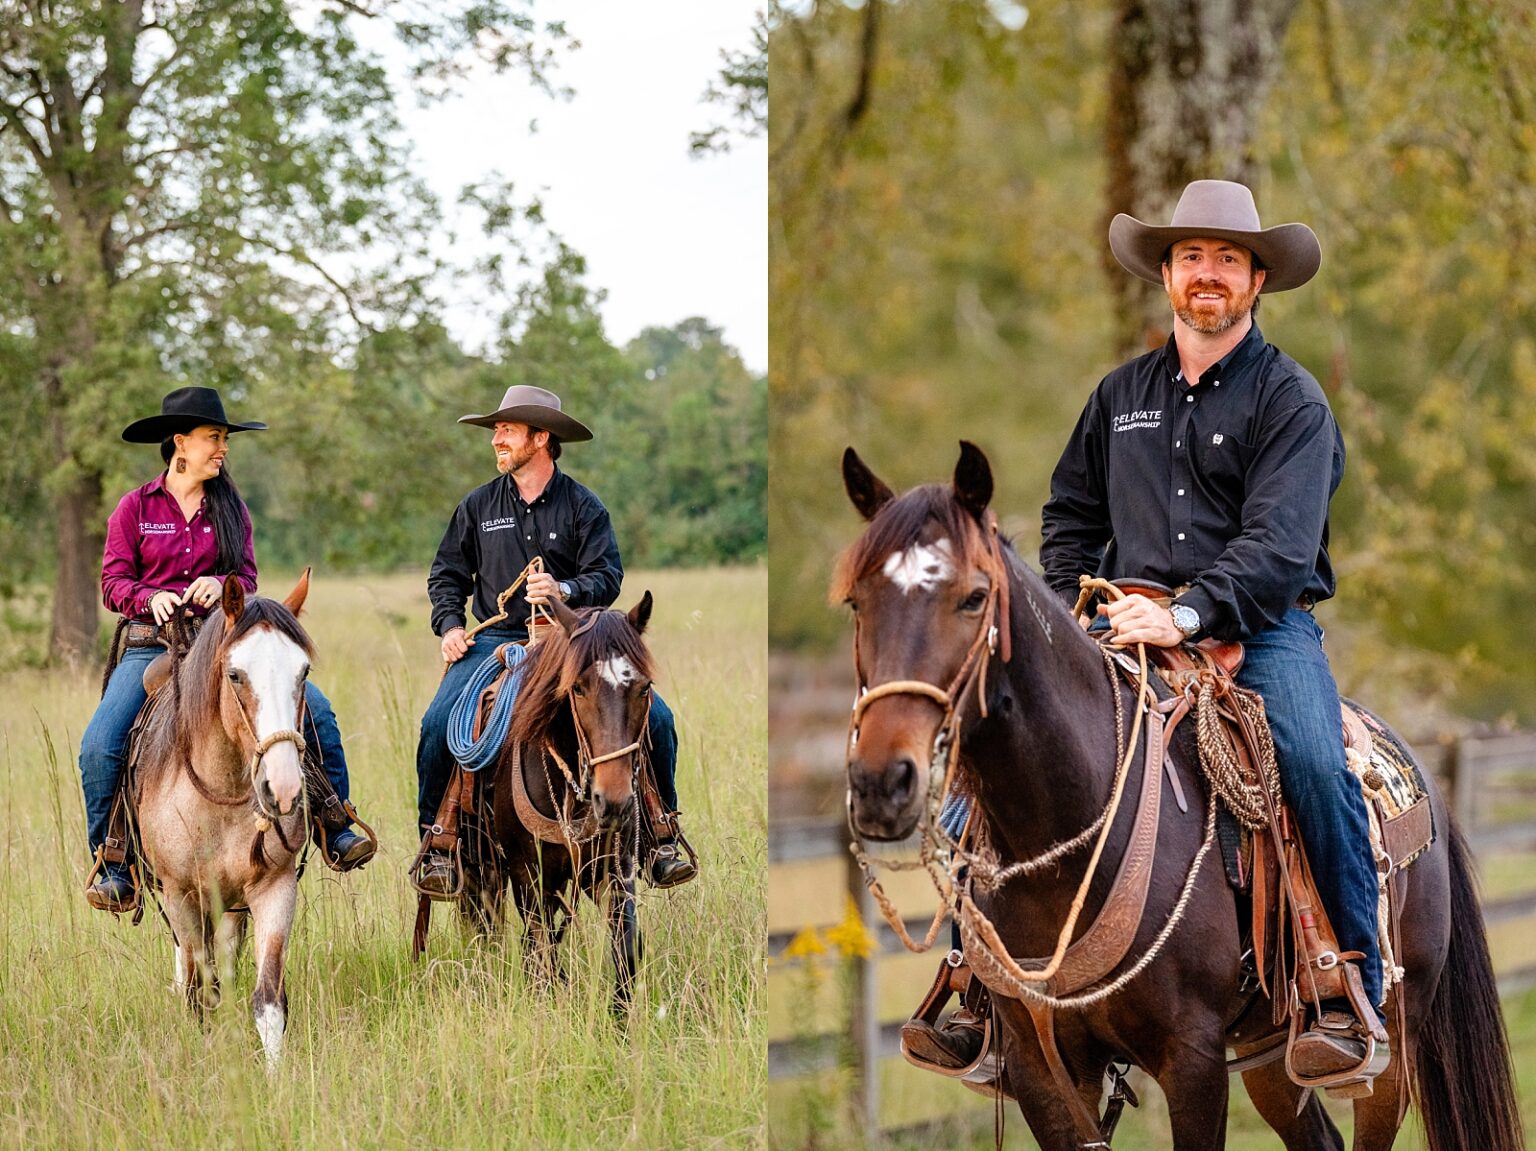 Elevate Horsemanship is a western horse trainer in Alabama who specializes in colt starting, problem solving, and cow horses. This equestrian business branding session created valuable content for their brand to use on social media, their website, and in printed materials at clinics and shows.